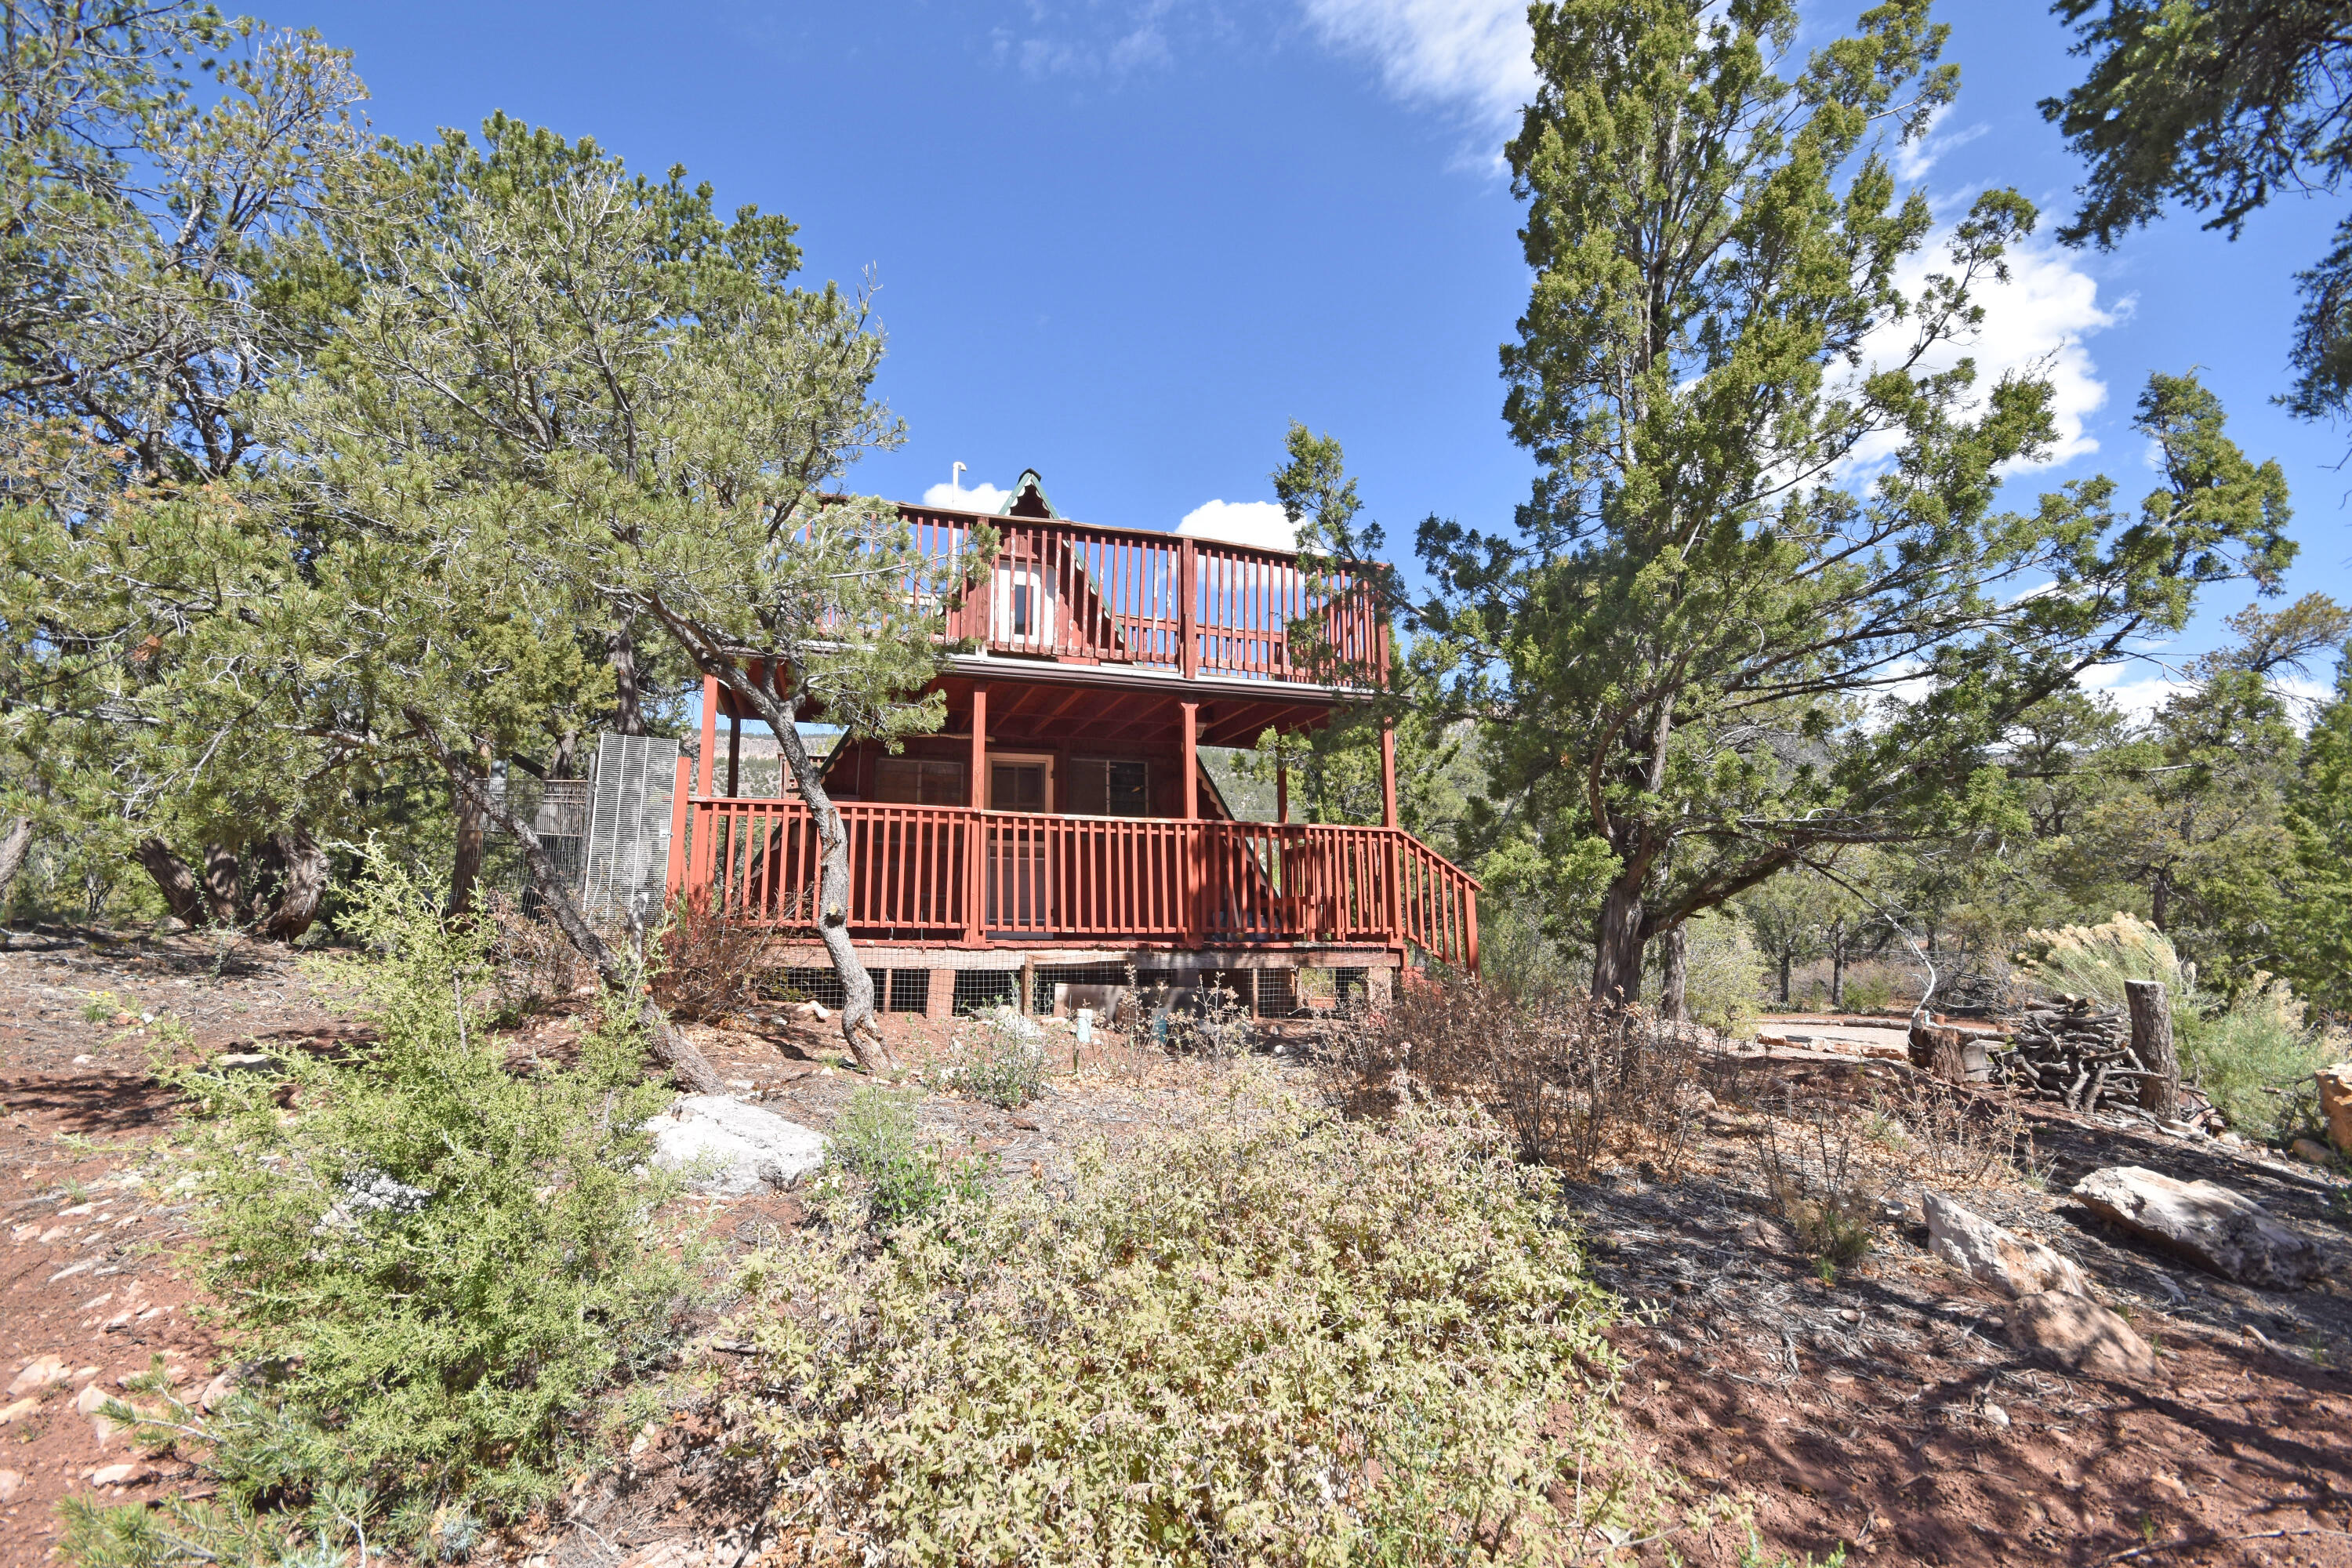 Talk about the perfect getaway at a great price! This cozy A-Frame nestled on a wooded lot in Area 2, just north of Jemez Springs, is a diamond in the rough with endless possibilities! Great potential for an investment property or add your own finishing touches and make it your go-to for weekend retreats. Double decker decks on the east and west gives you plenty of space to enjoy the views of the spectacular soaring mesa walls! There is a space for sleeping quarters downstairs or to use as sitting area. Functional Galley kitchen, a wood burning stove to keep things cozy in the living area, as well as a mini split system. Loft upstairs to use as a bedroom, or as a spot for guests. Bring vision and a hammer, the sky is the limit with this charmer!